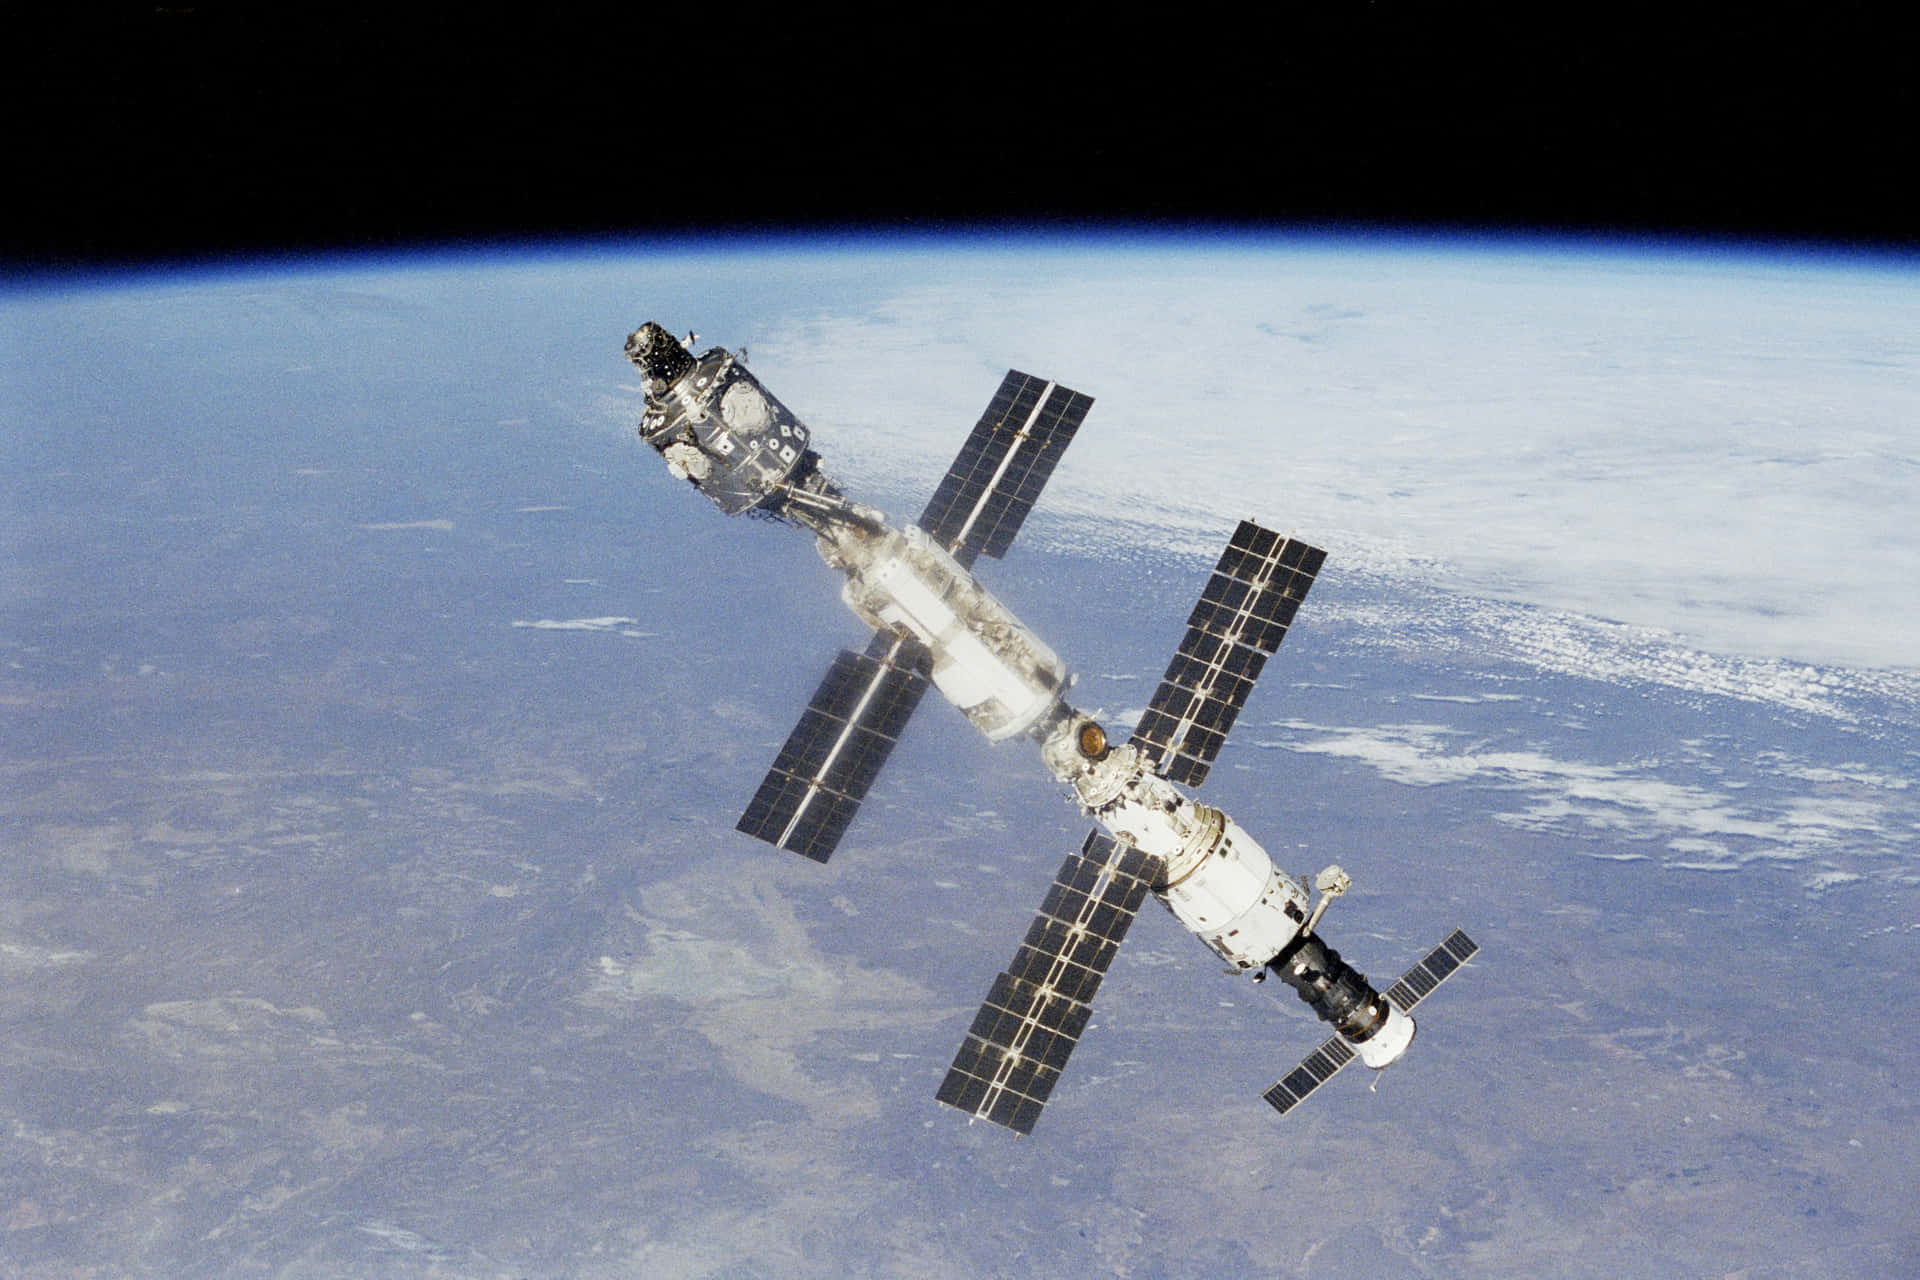 A breathtaking view of the International Space Station (ISS) orbiting Earth. Wallpaper